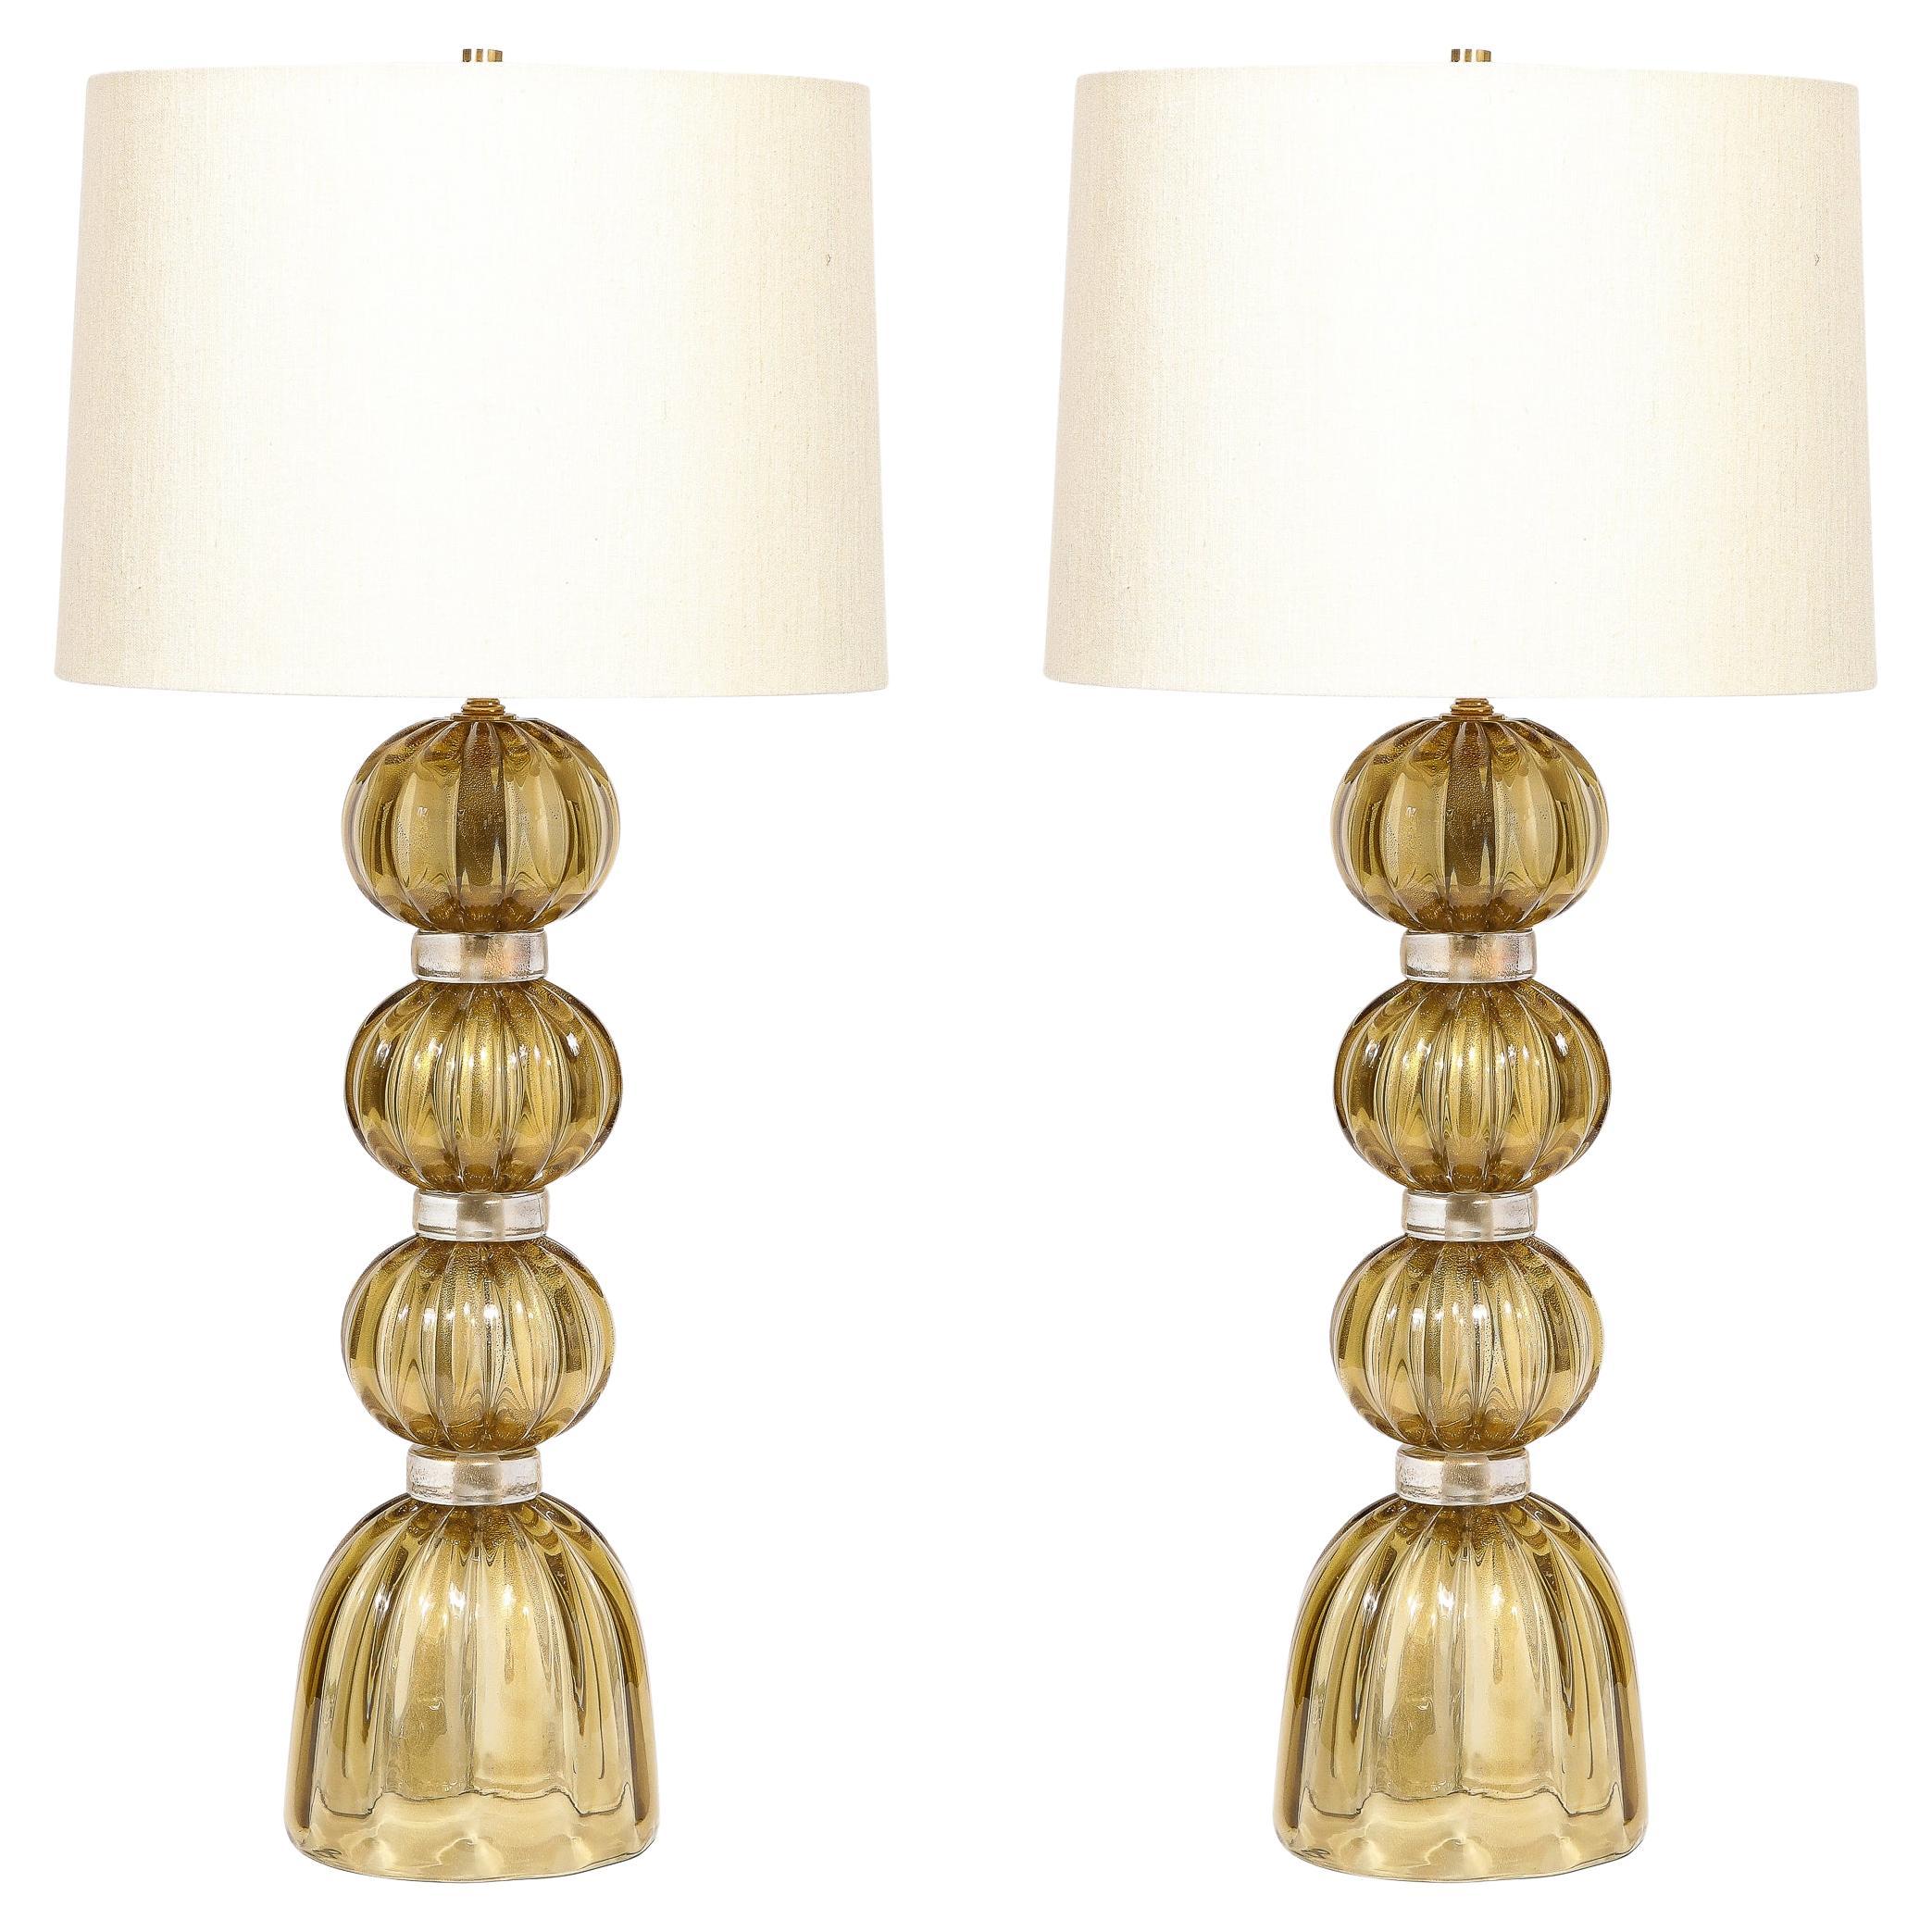 Modernist Hand-Blown Murano Glass Table Lamps in Smoked Gold W/ 24 Karat Flecks For Sale